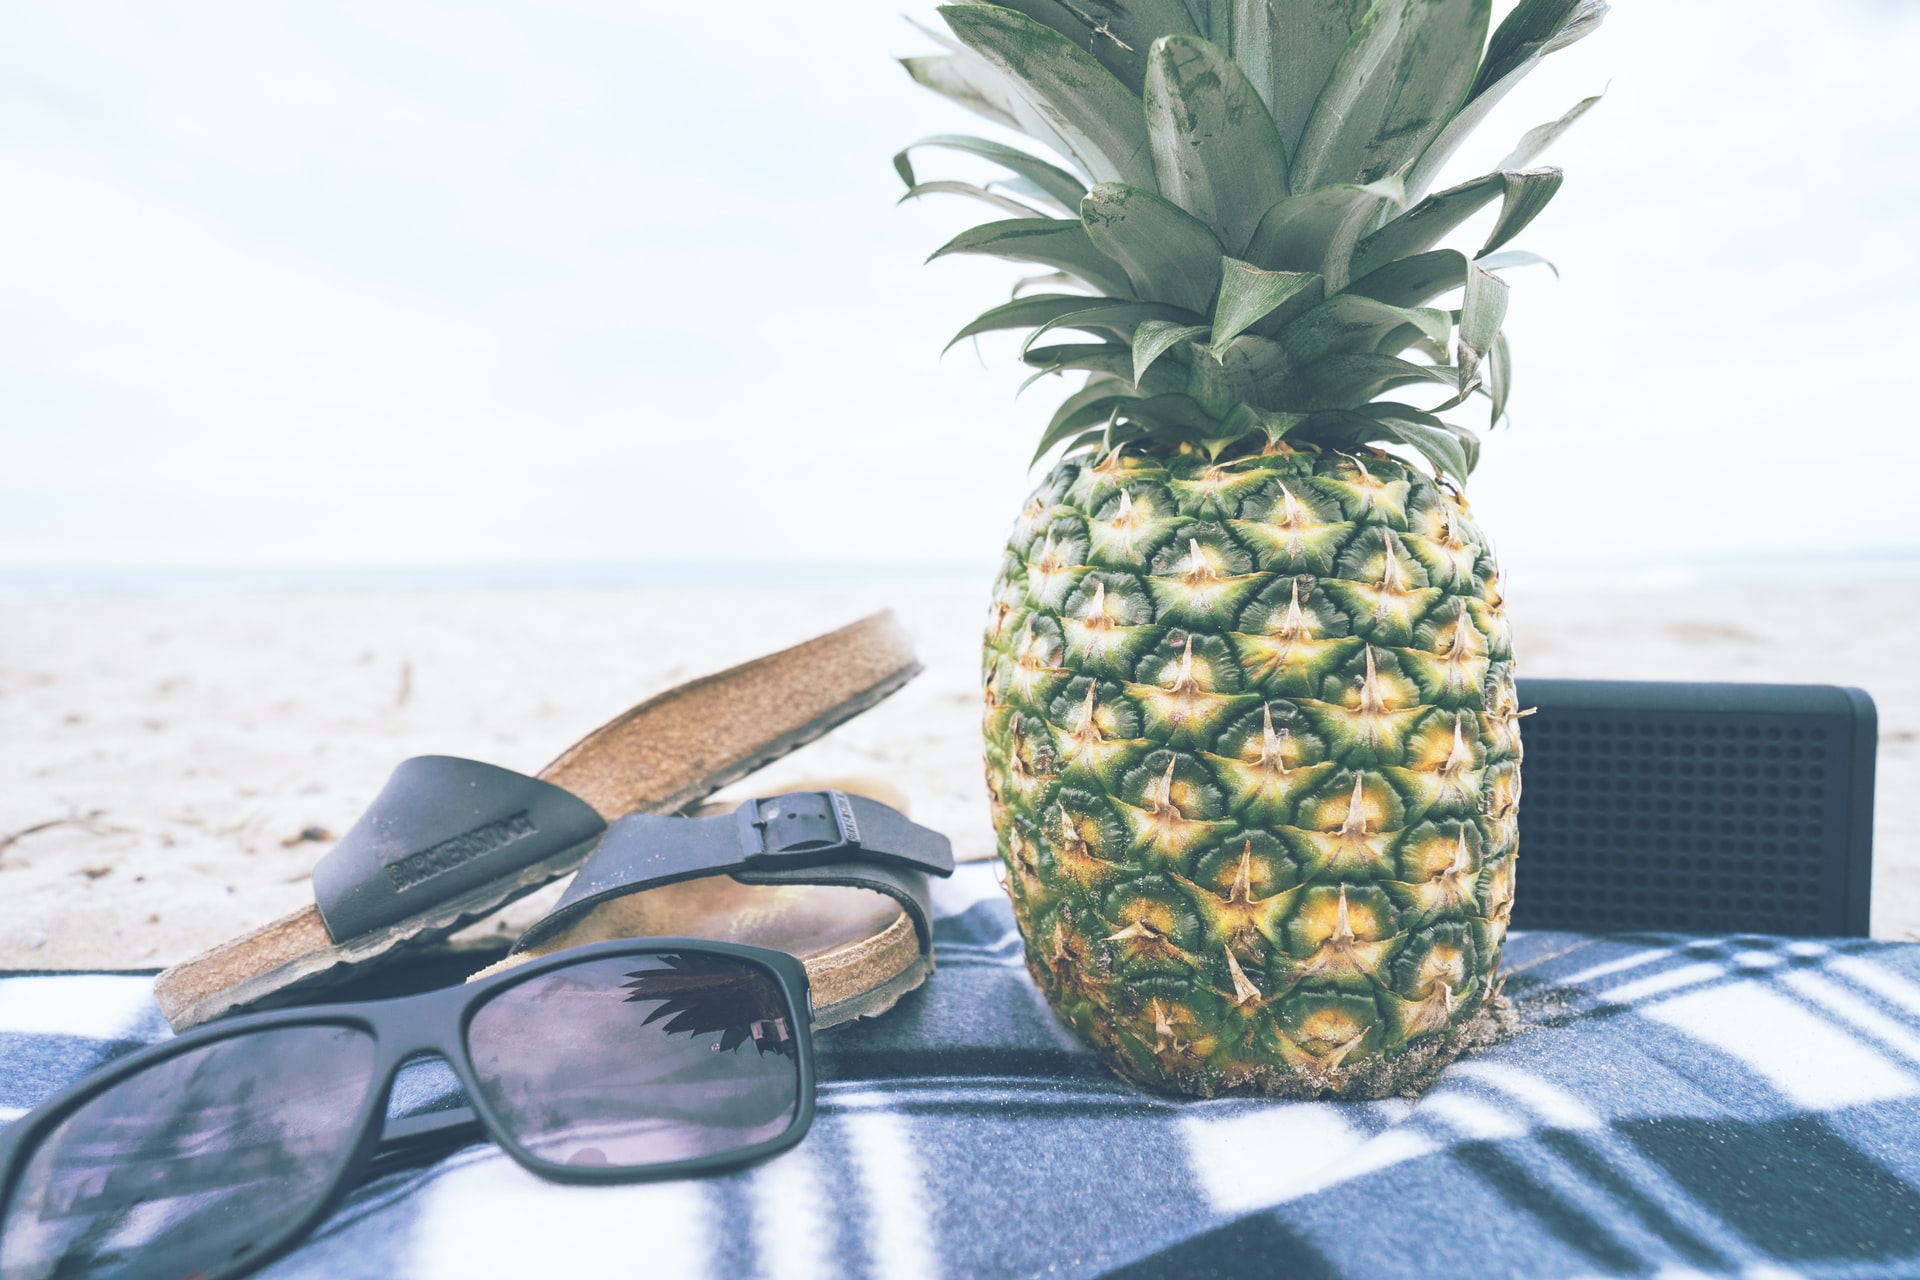 Prepare For Summer With These Eye Safety Tips